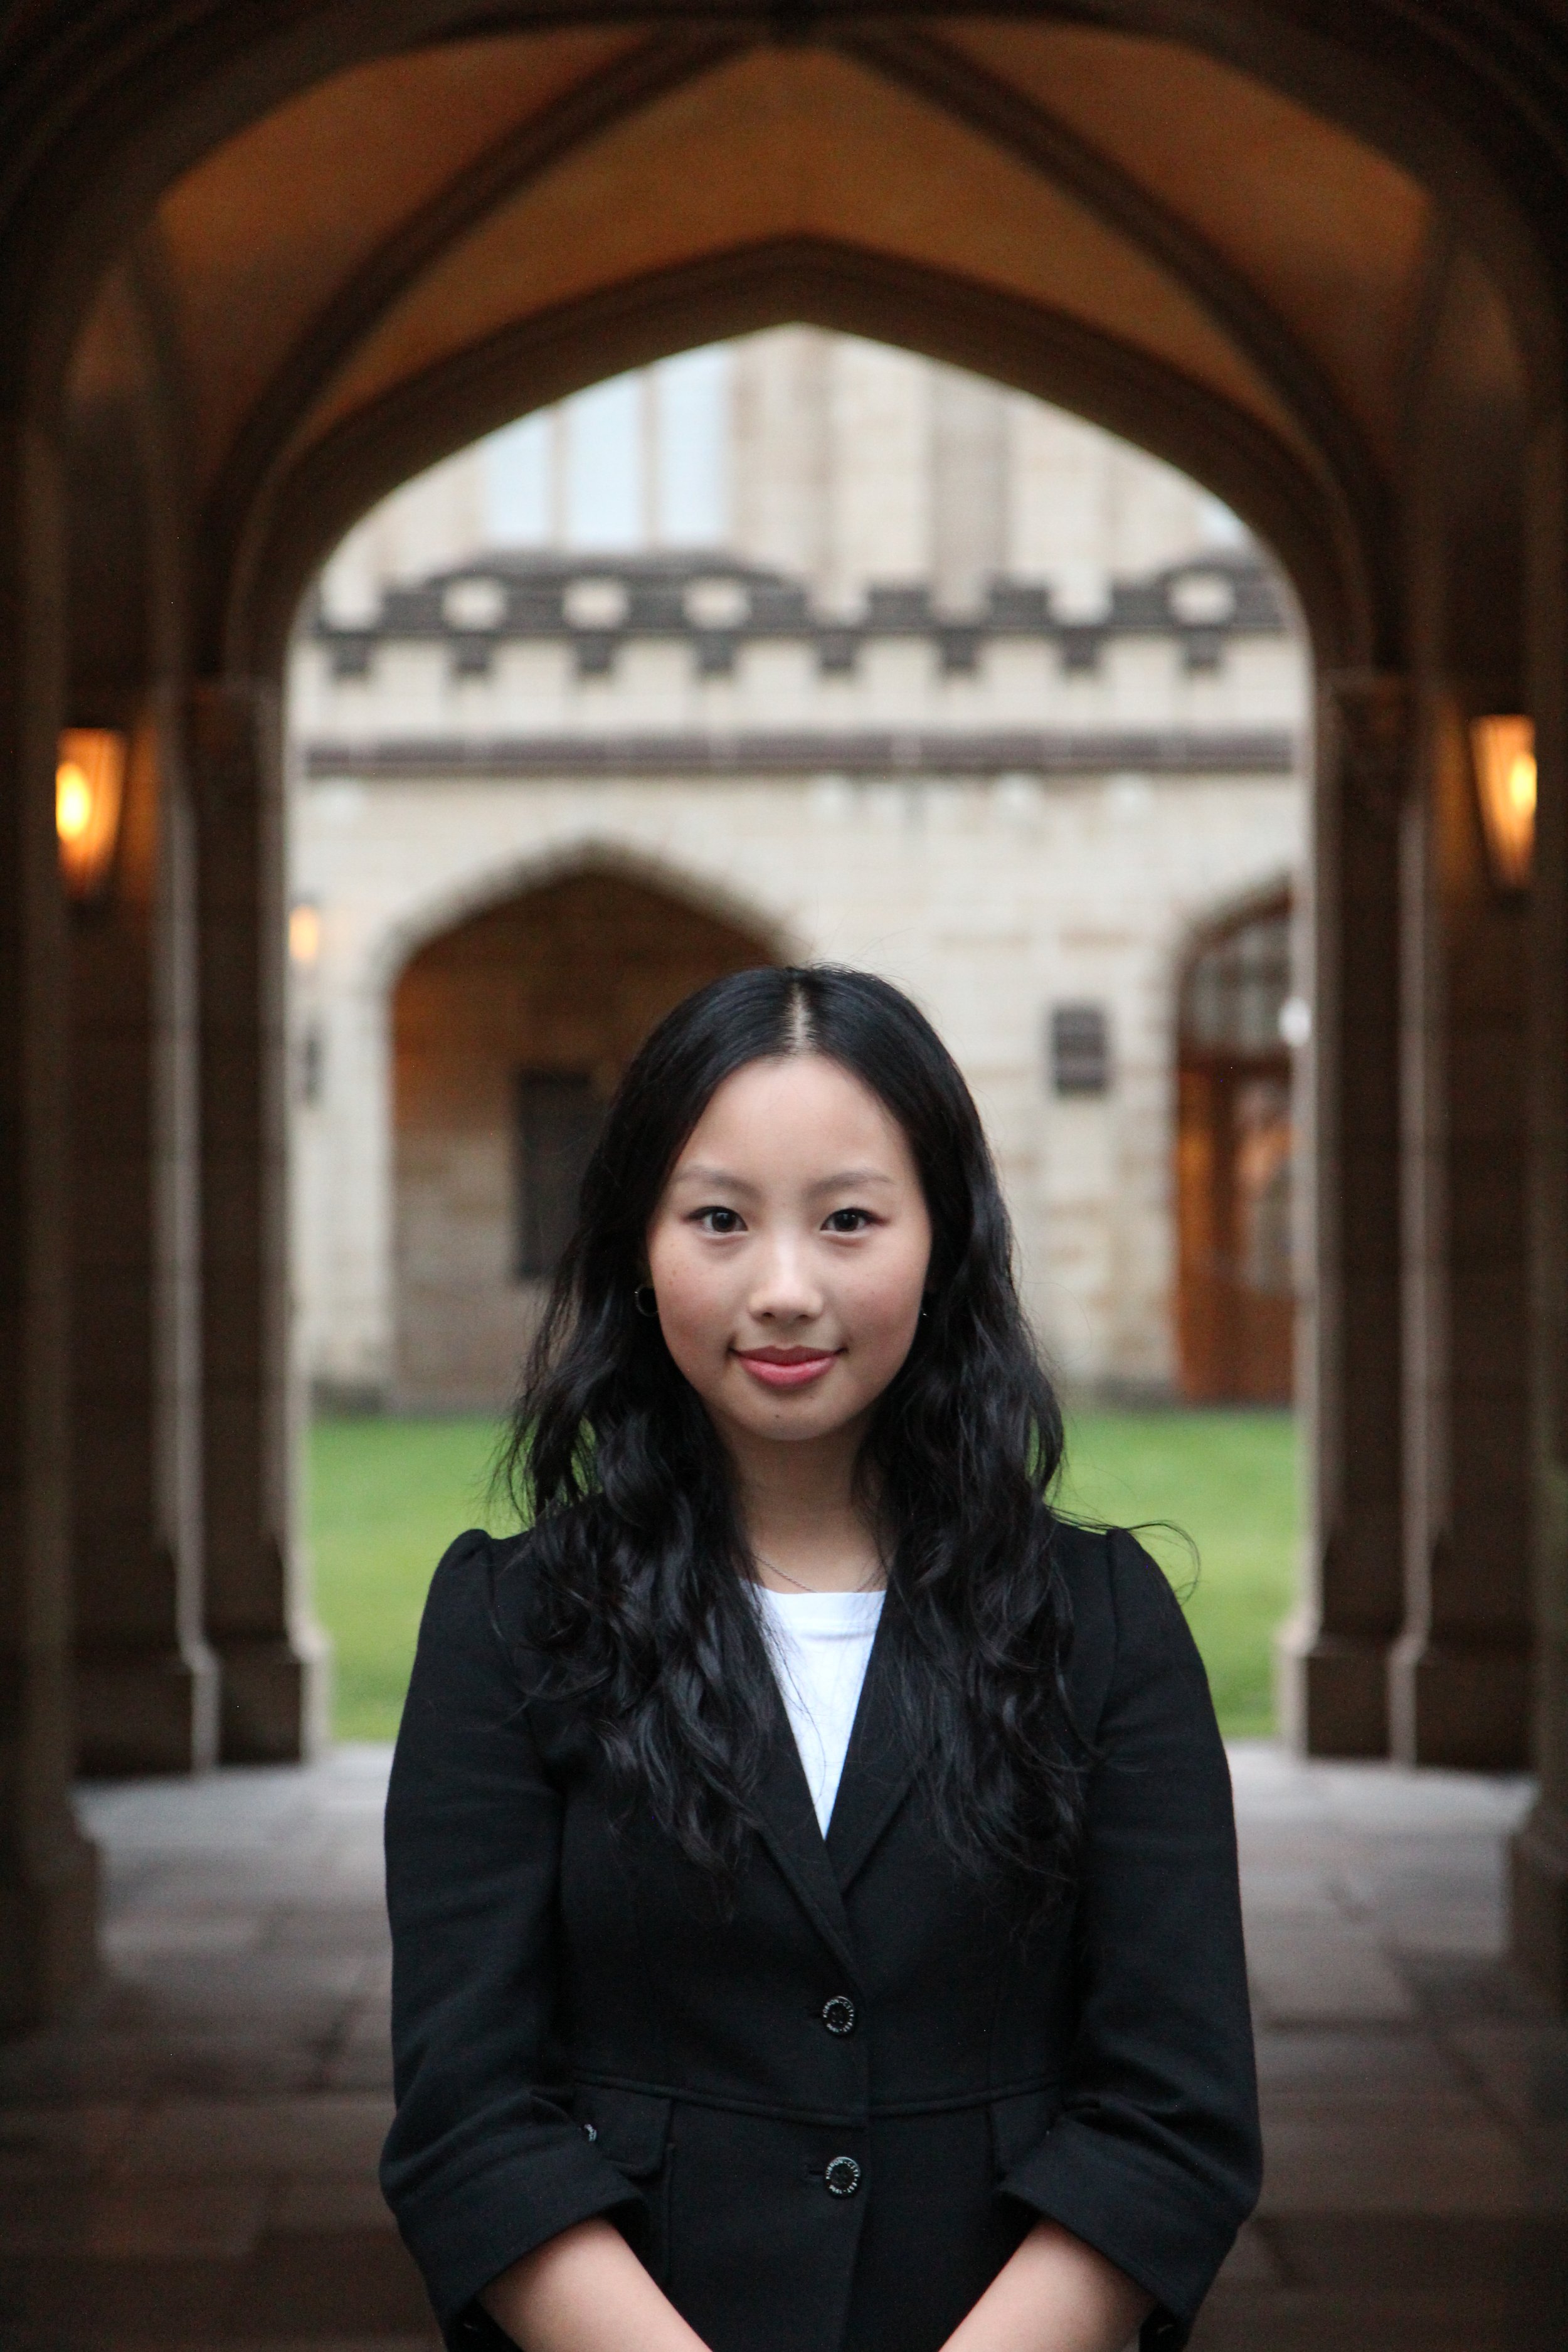 Emmaline Chow - Events Officer